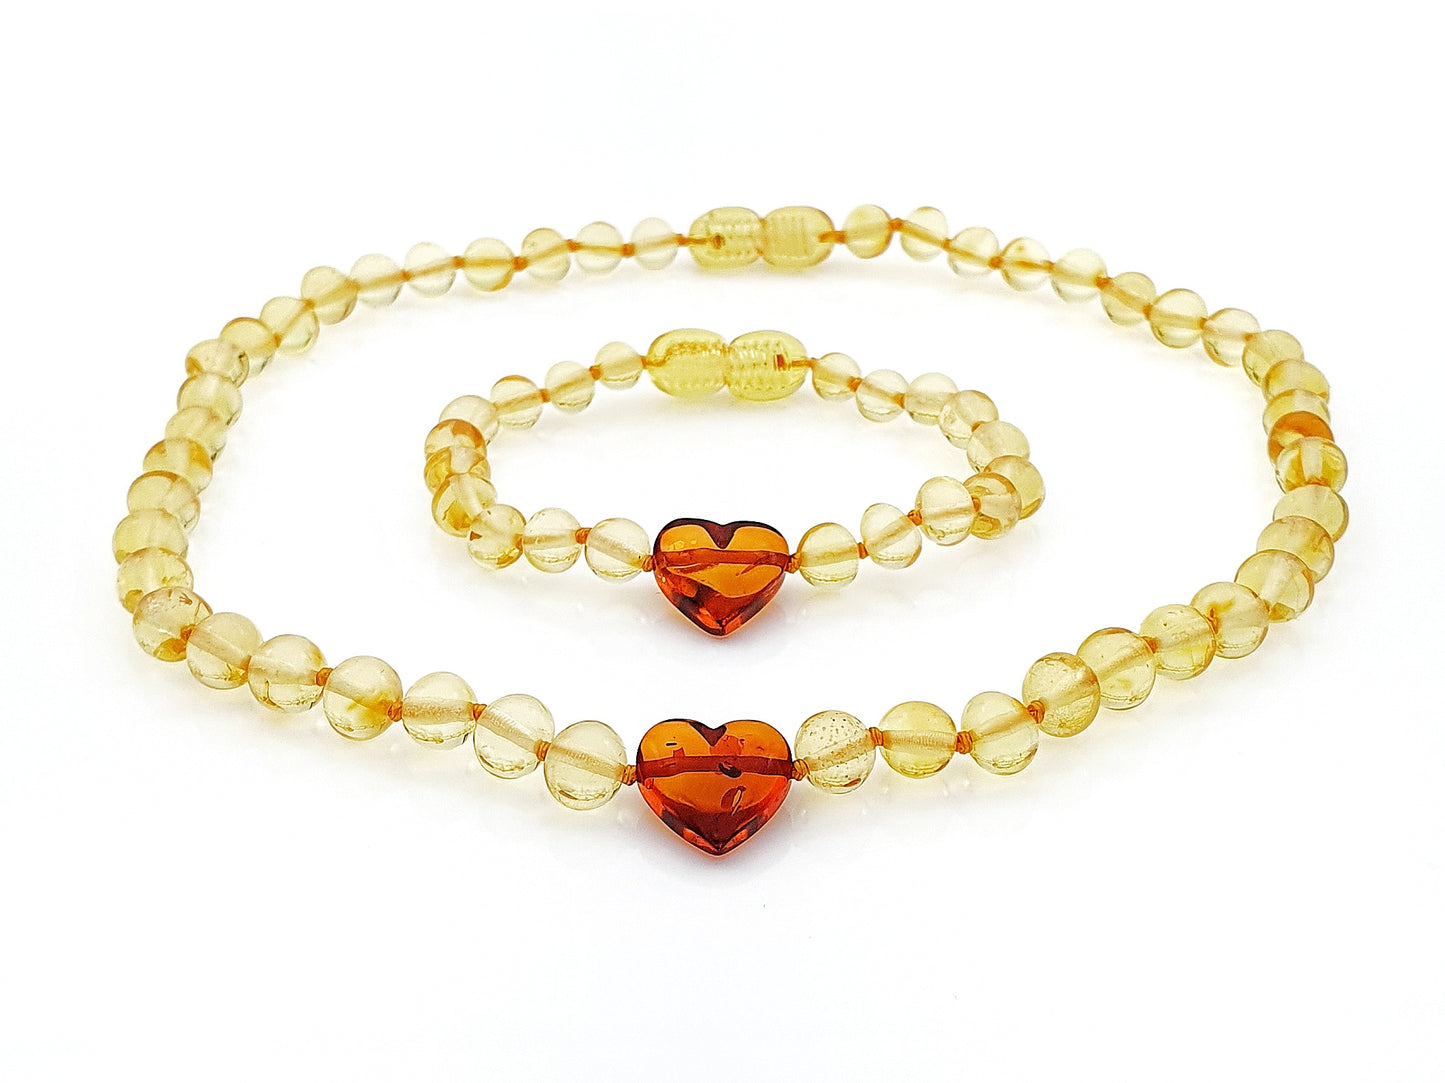 Natural amber teething bracelet and necklace with pendant